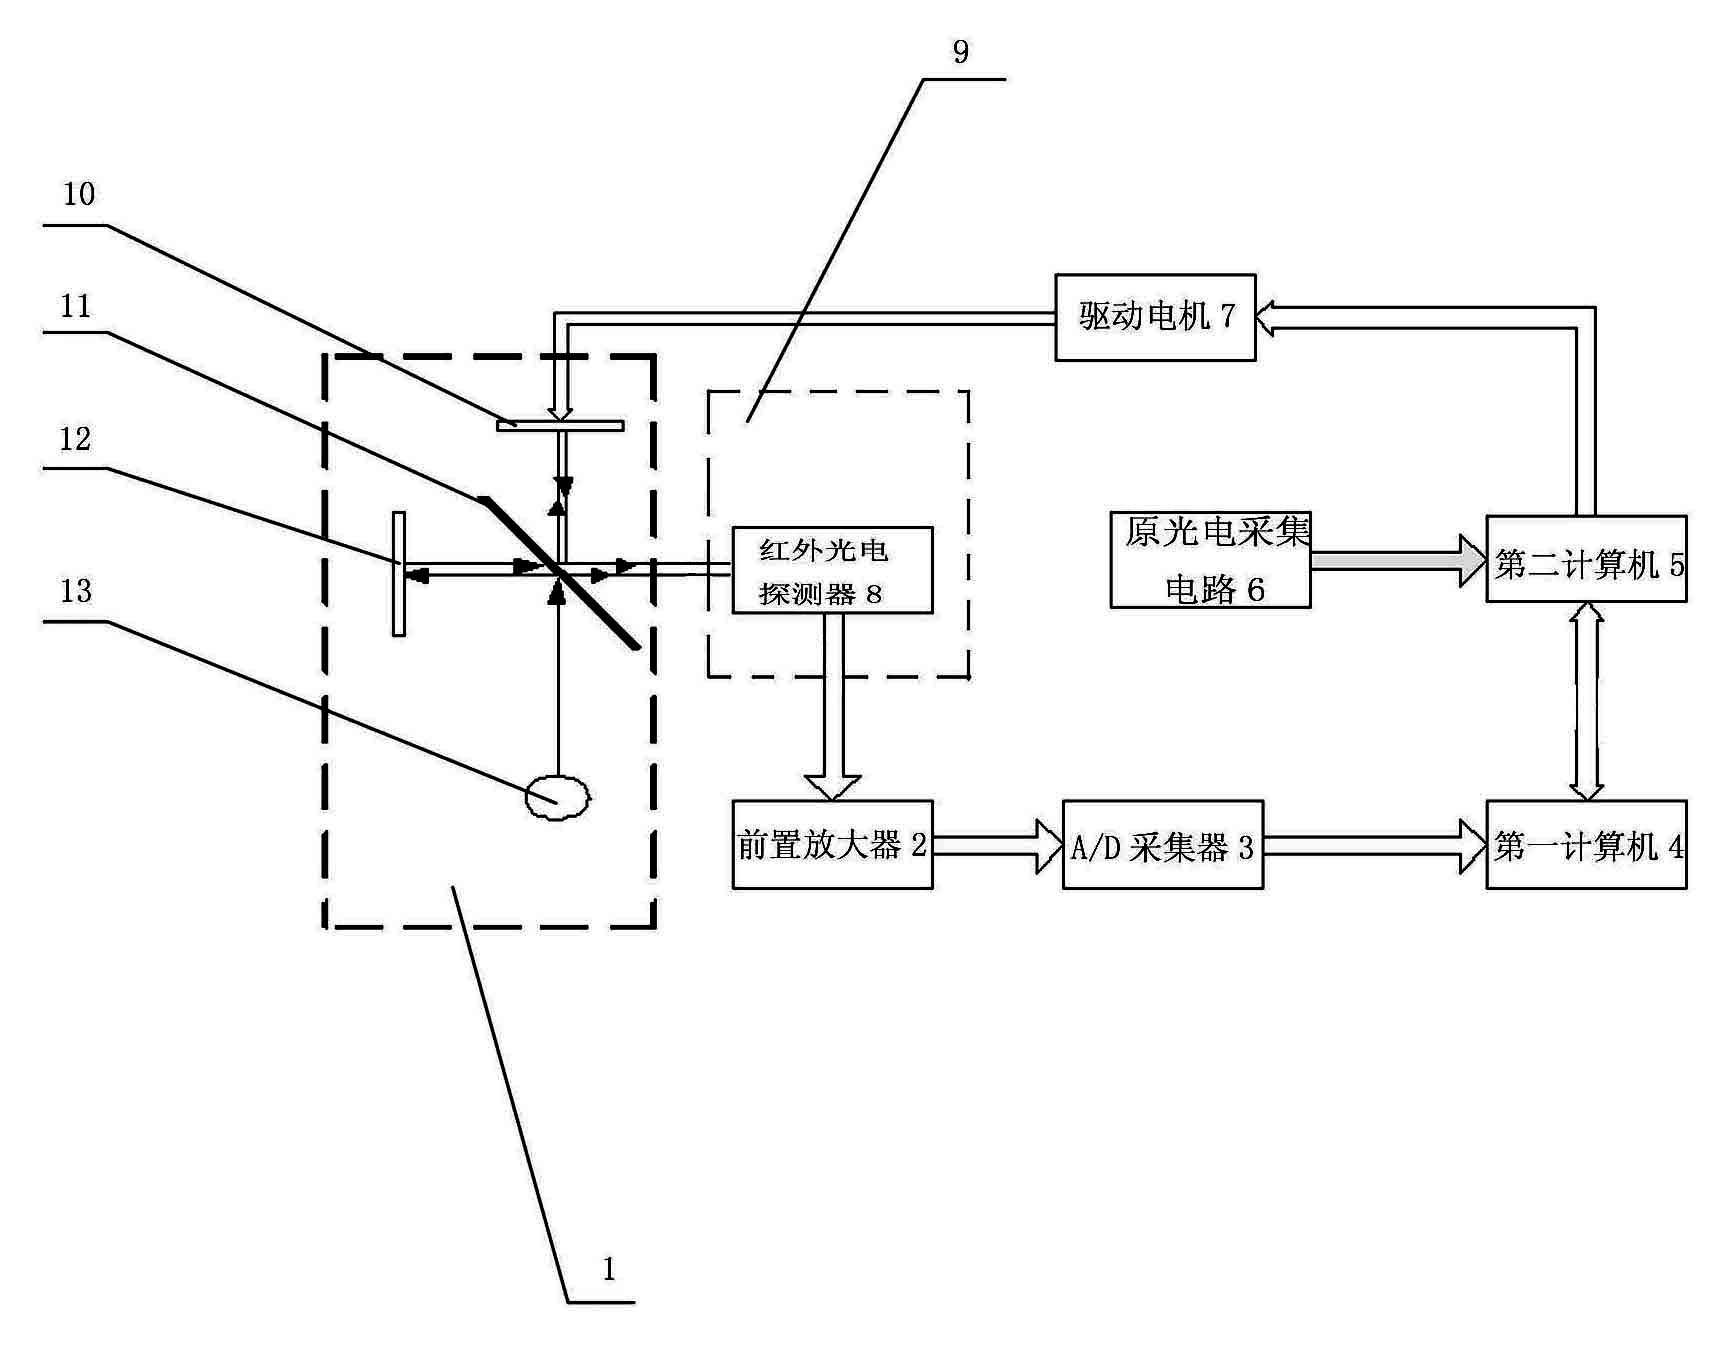 Device for measuring spectral responsivity of infrared photoelectric detector